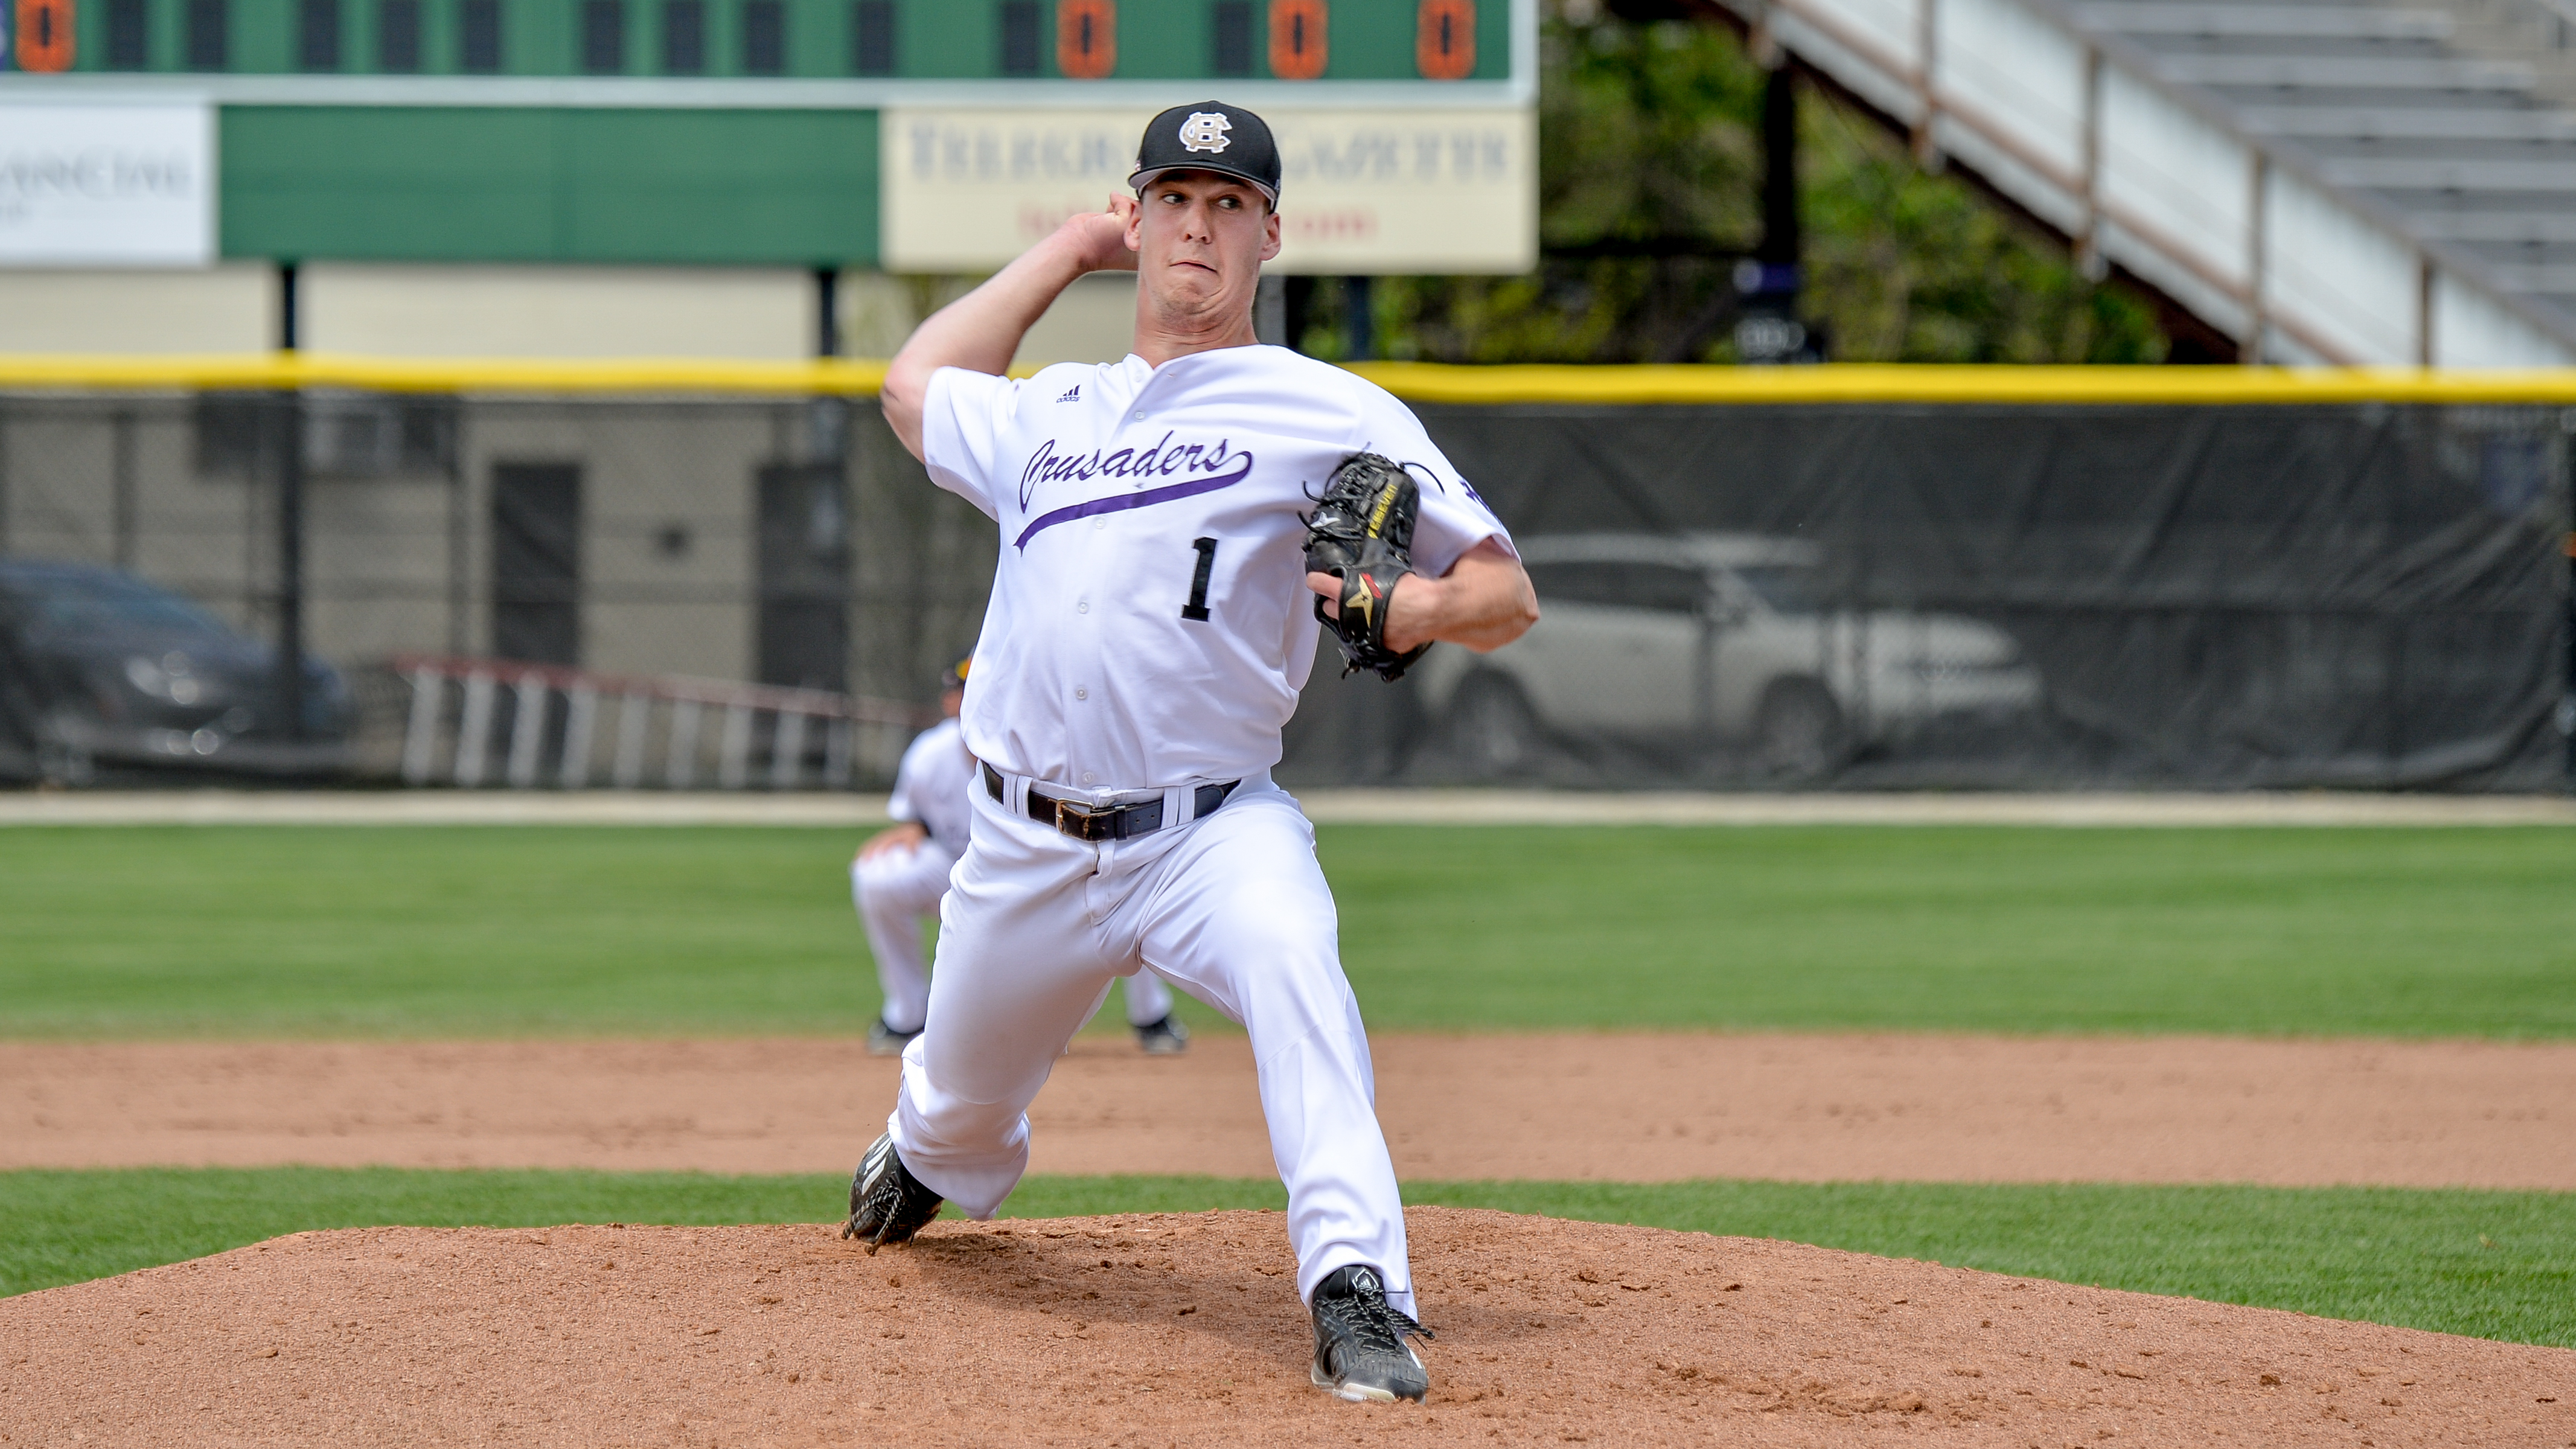 Holy Cross’ King, Navy’s Smith Lead Patriot League | College Baseball ...